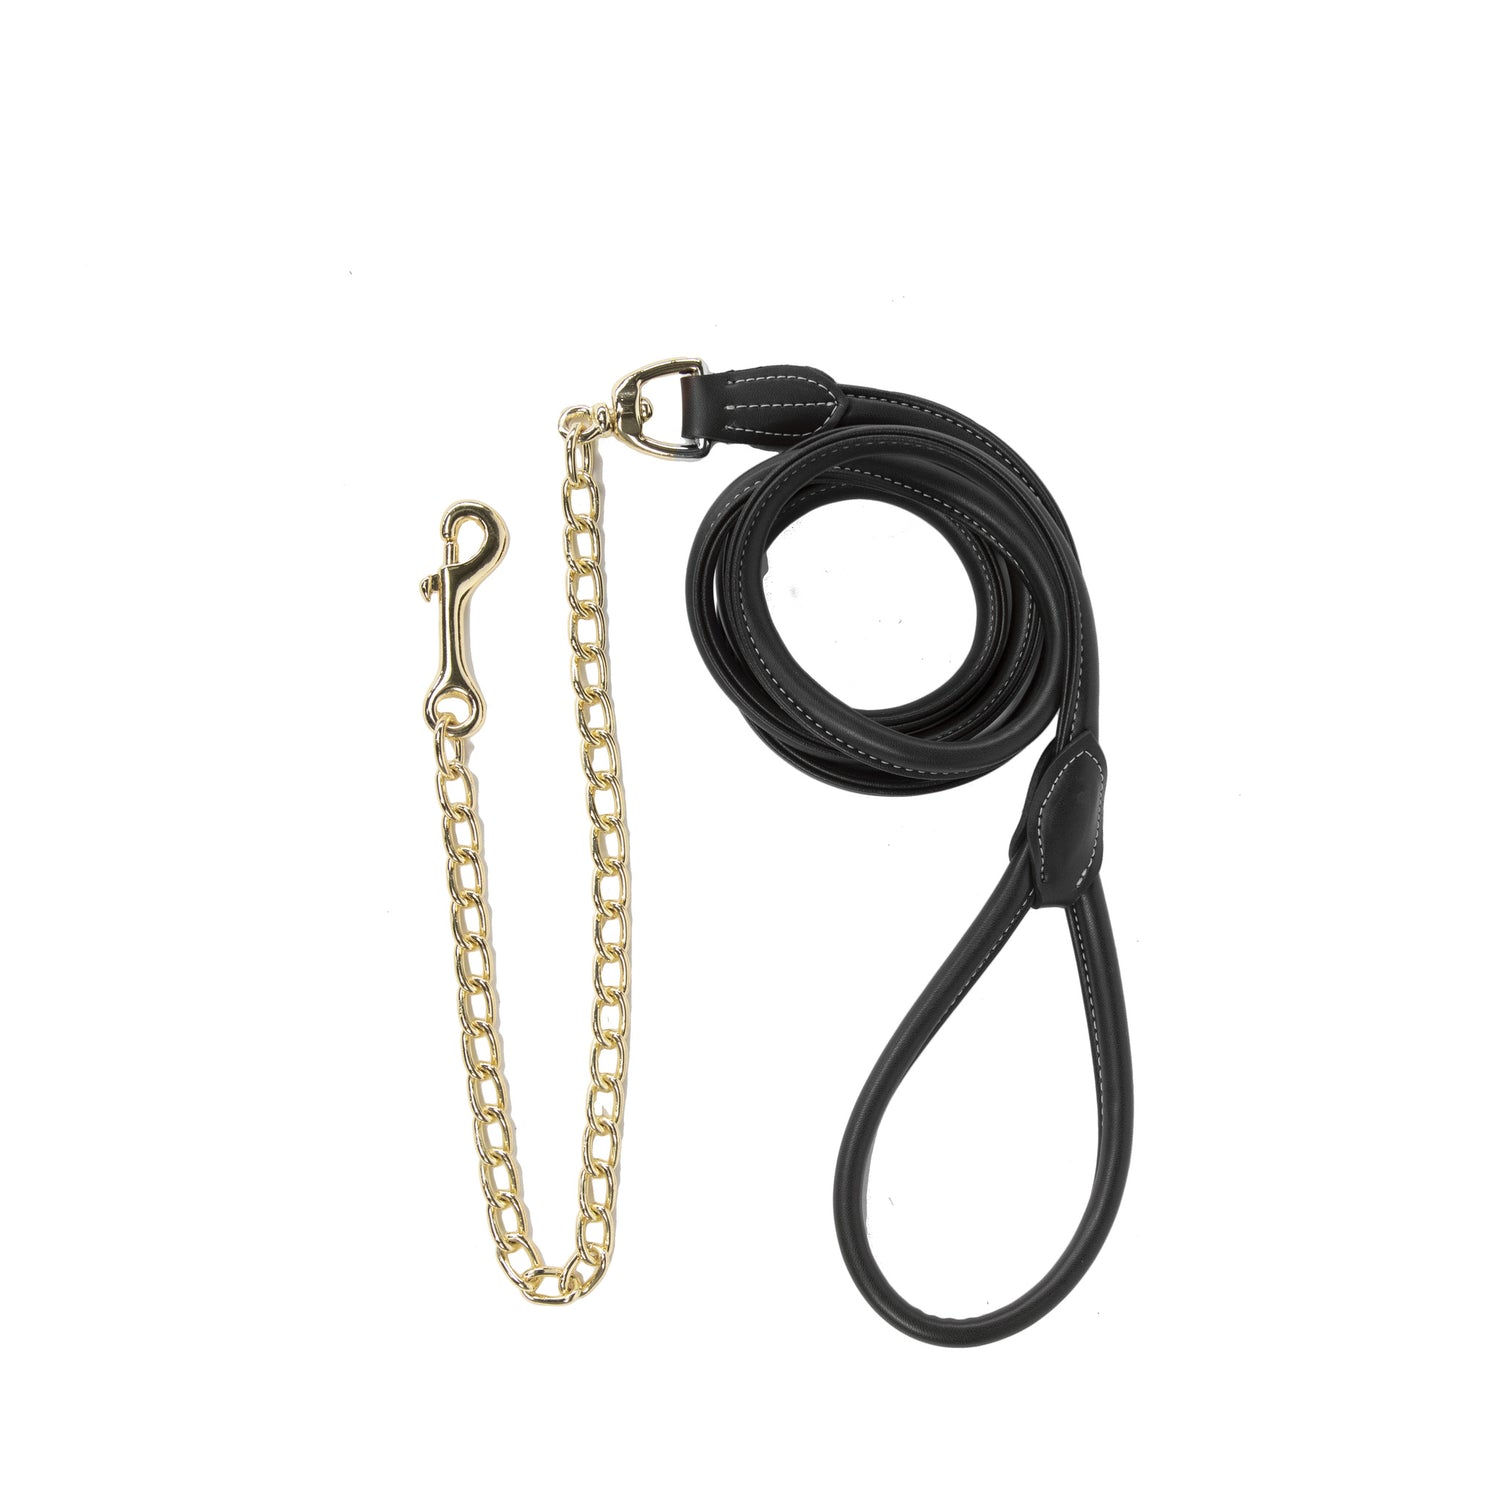 Present your horse in style with this Kentucky leather chain lead.   This lead is made from artificial leather, making it water and dirty proof and providing you with easy maintenance. Extremely comfortable to hold with a rolled leather finish and hand loop. 